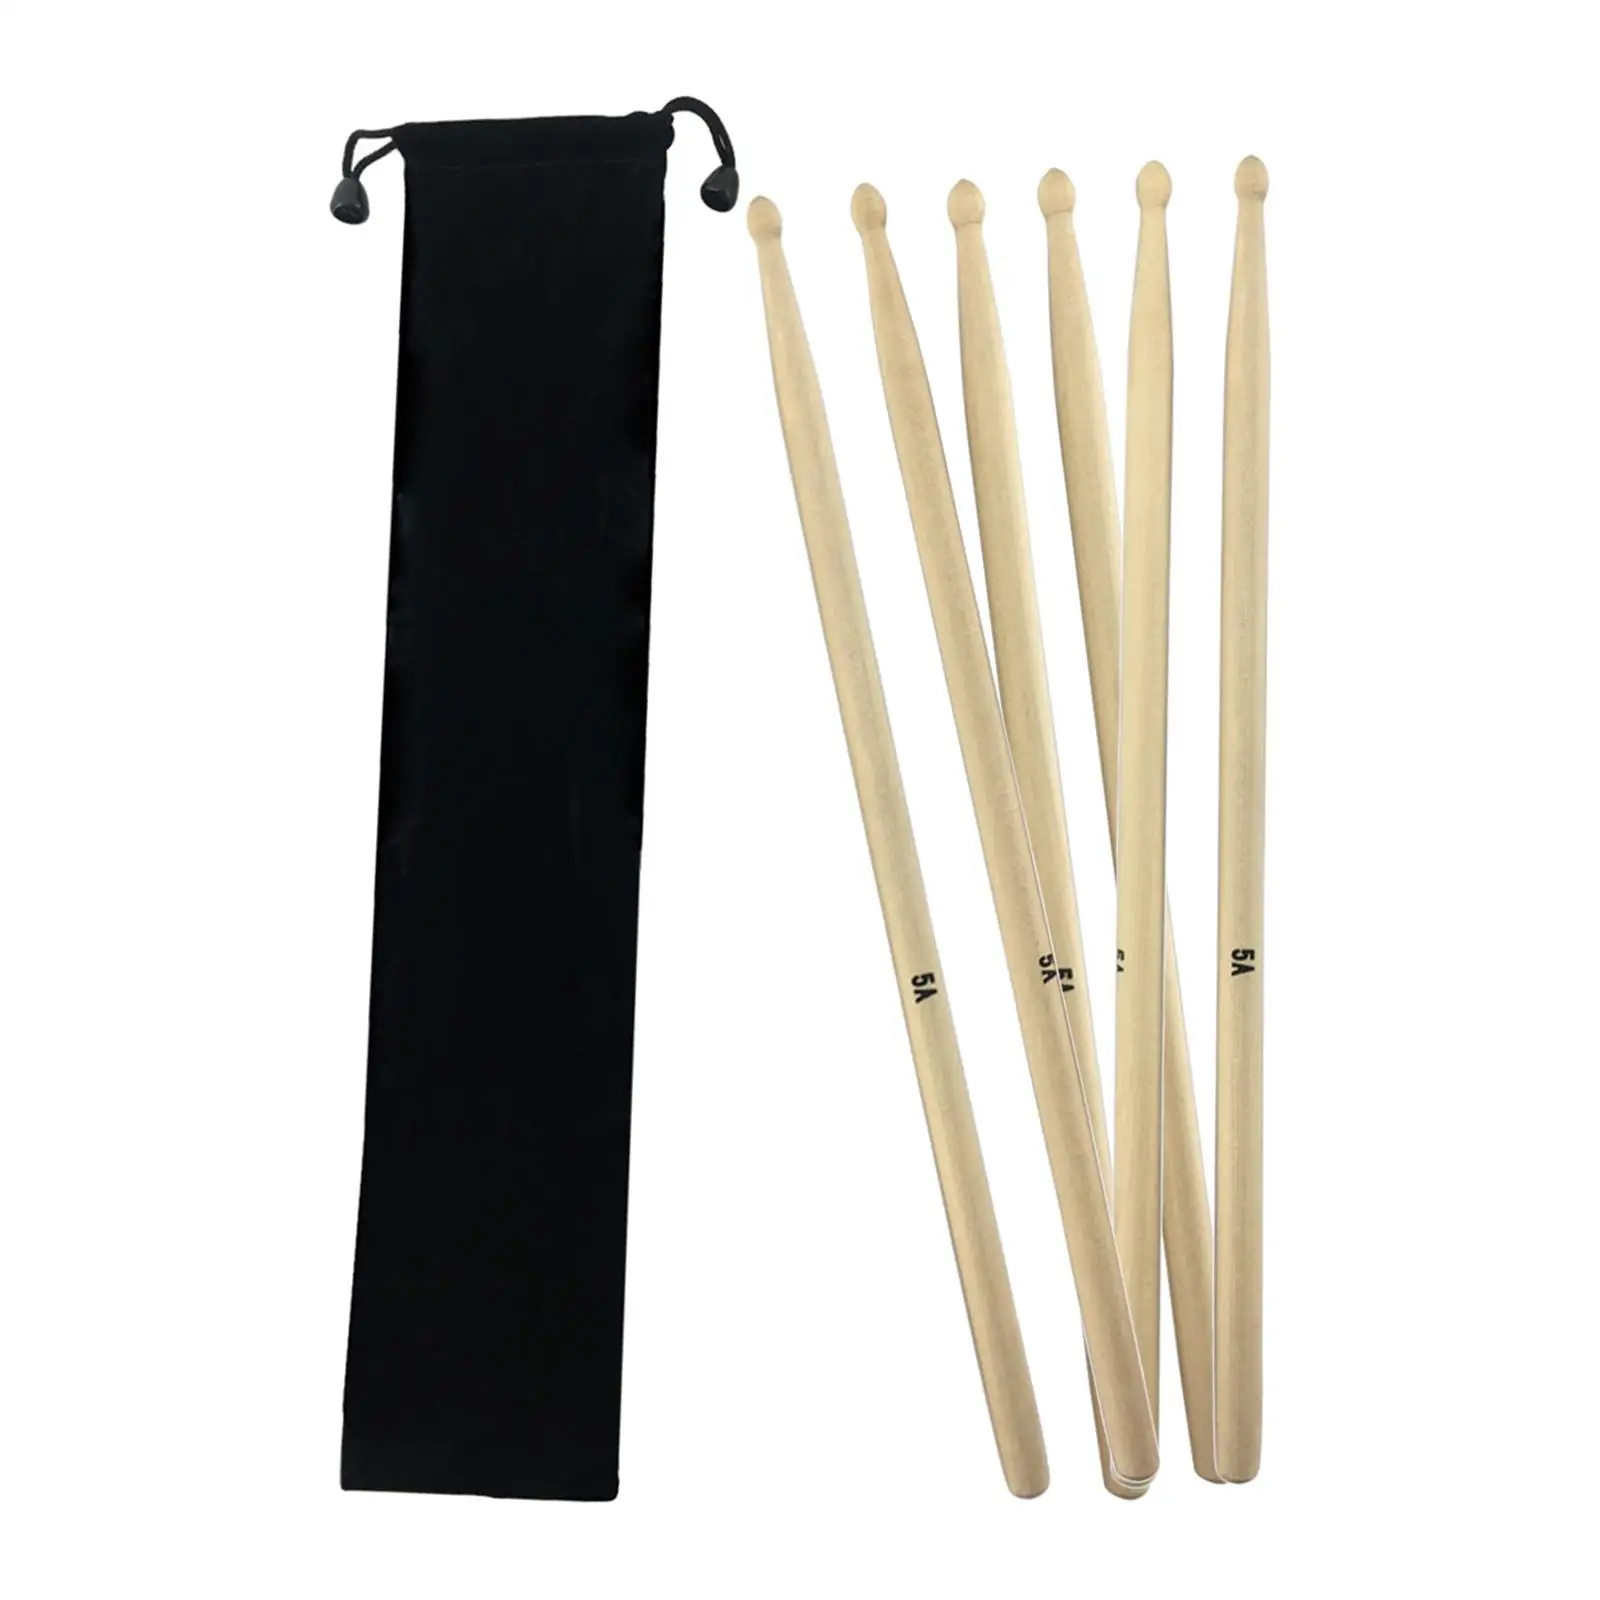 6Pcs Percussion Mallets Sticks with Carrying Bag Glockenspiel Sticks for Glockenspiel Practitioners Xylophone Woodblock Drum